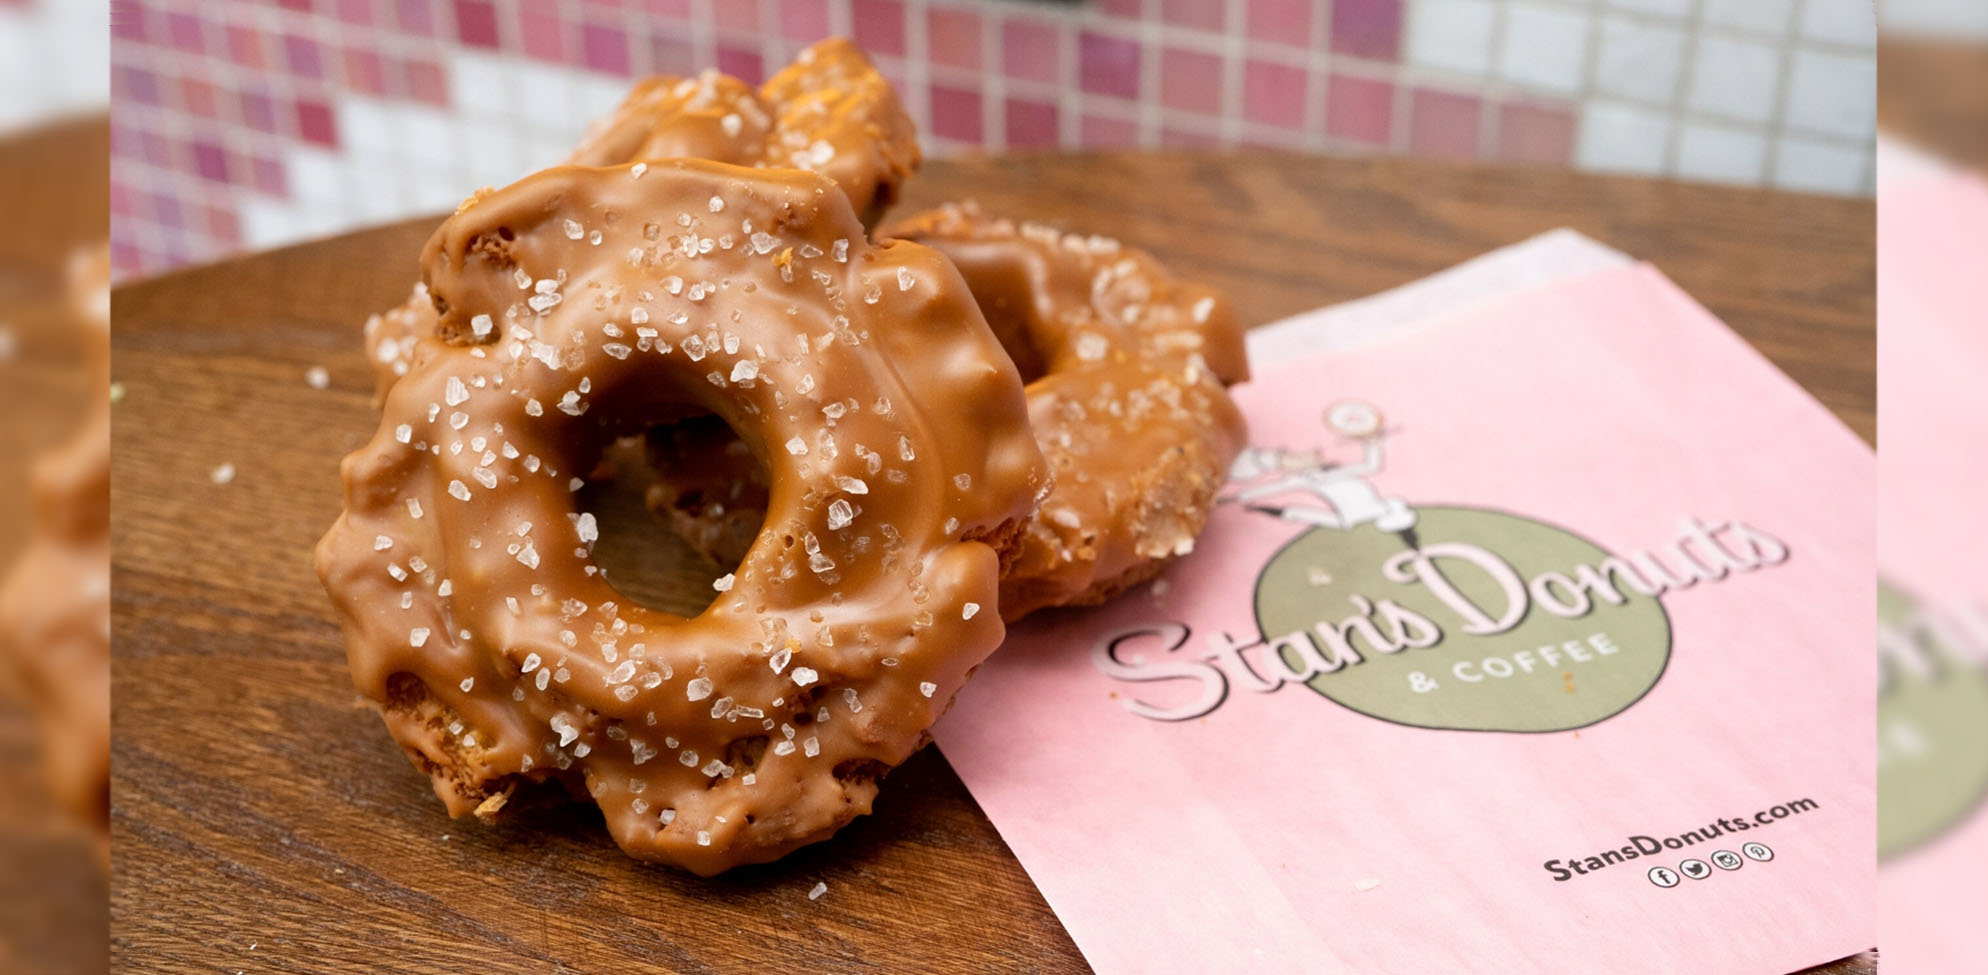 Morton Salt and Stan’s Donuts come together to serve up the exclusive ‘Salted Caramel Old Fashioned’ Donut image